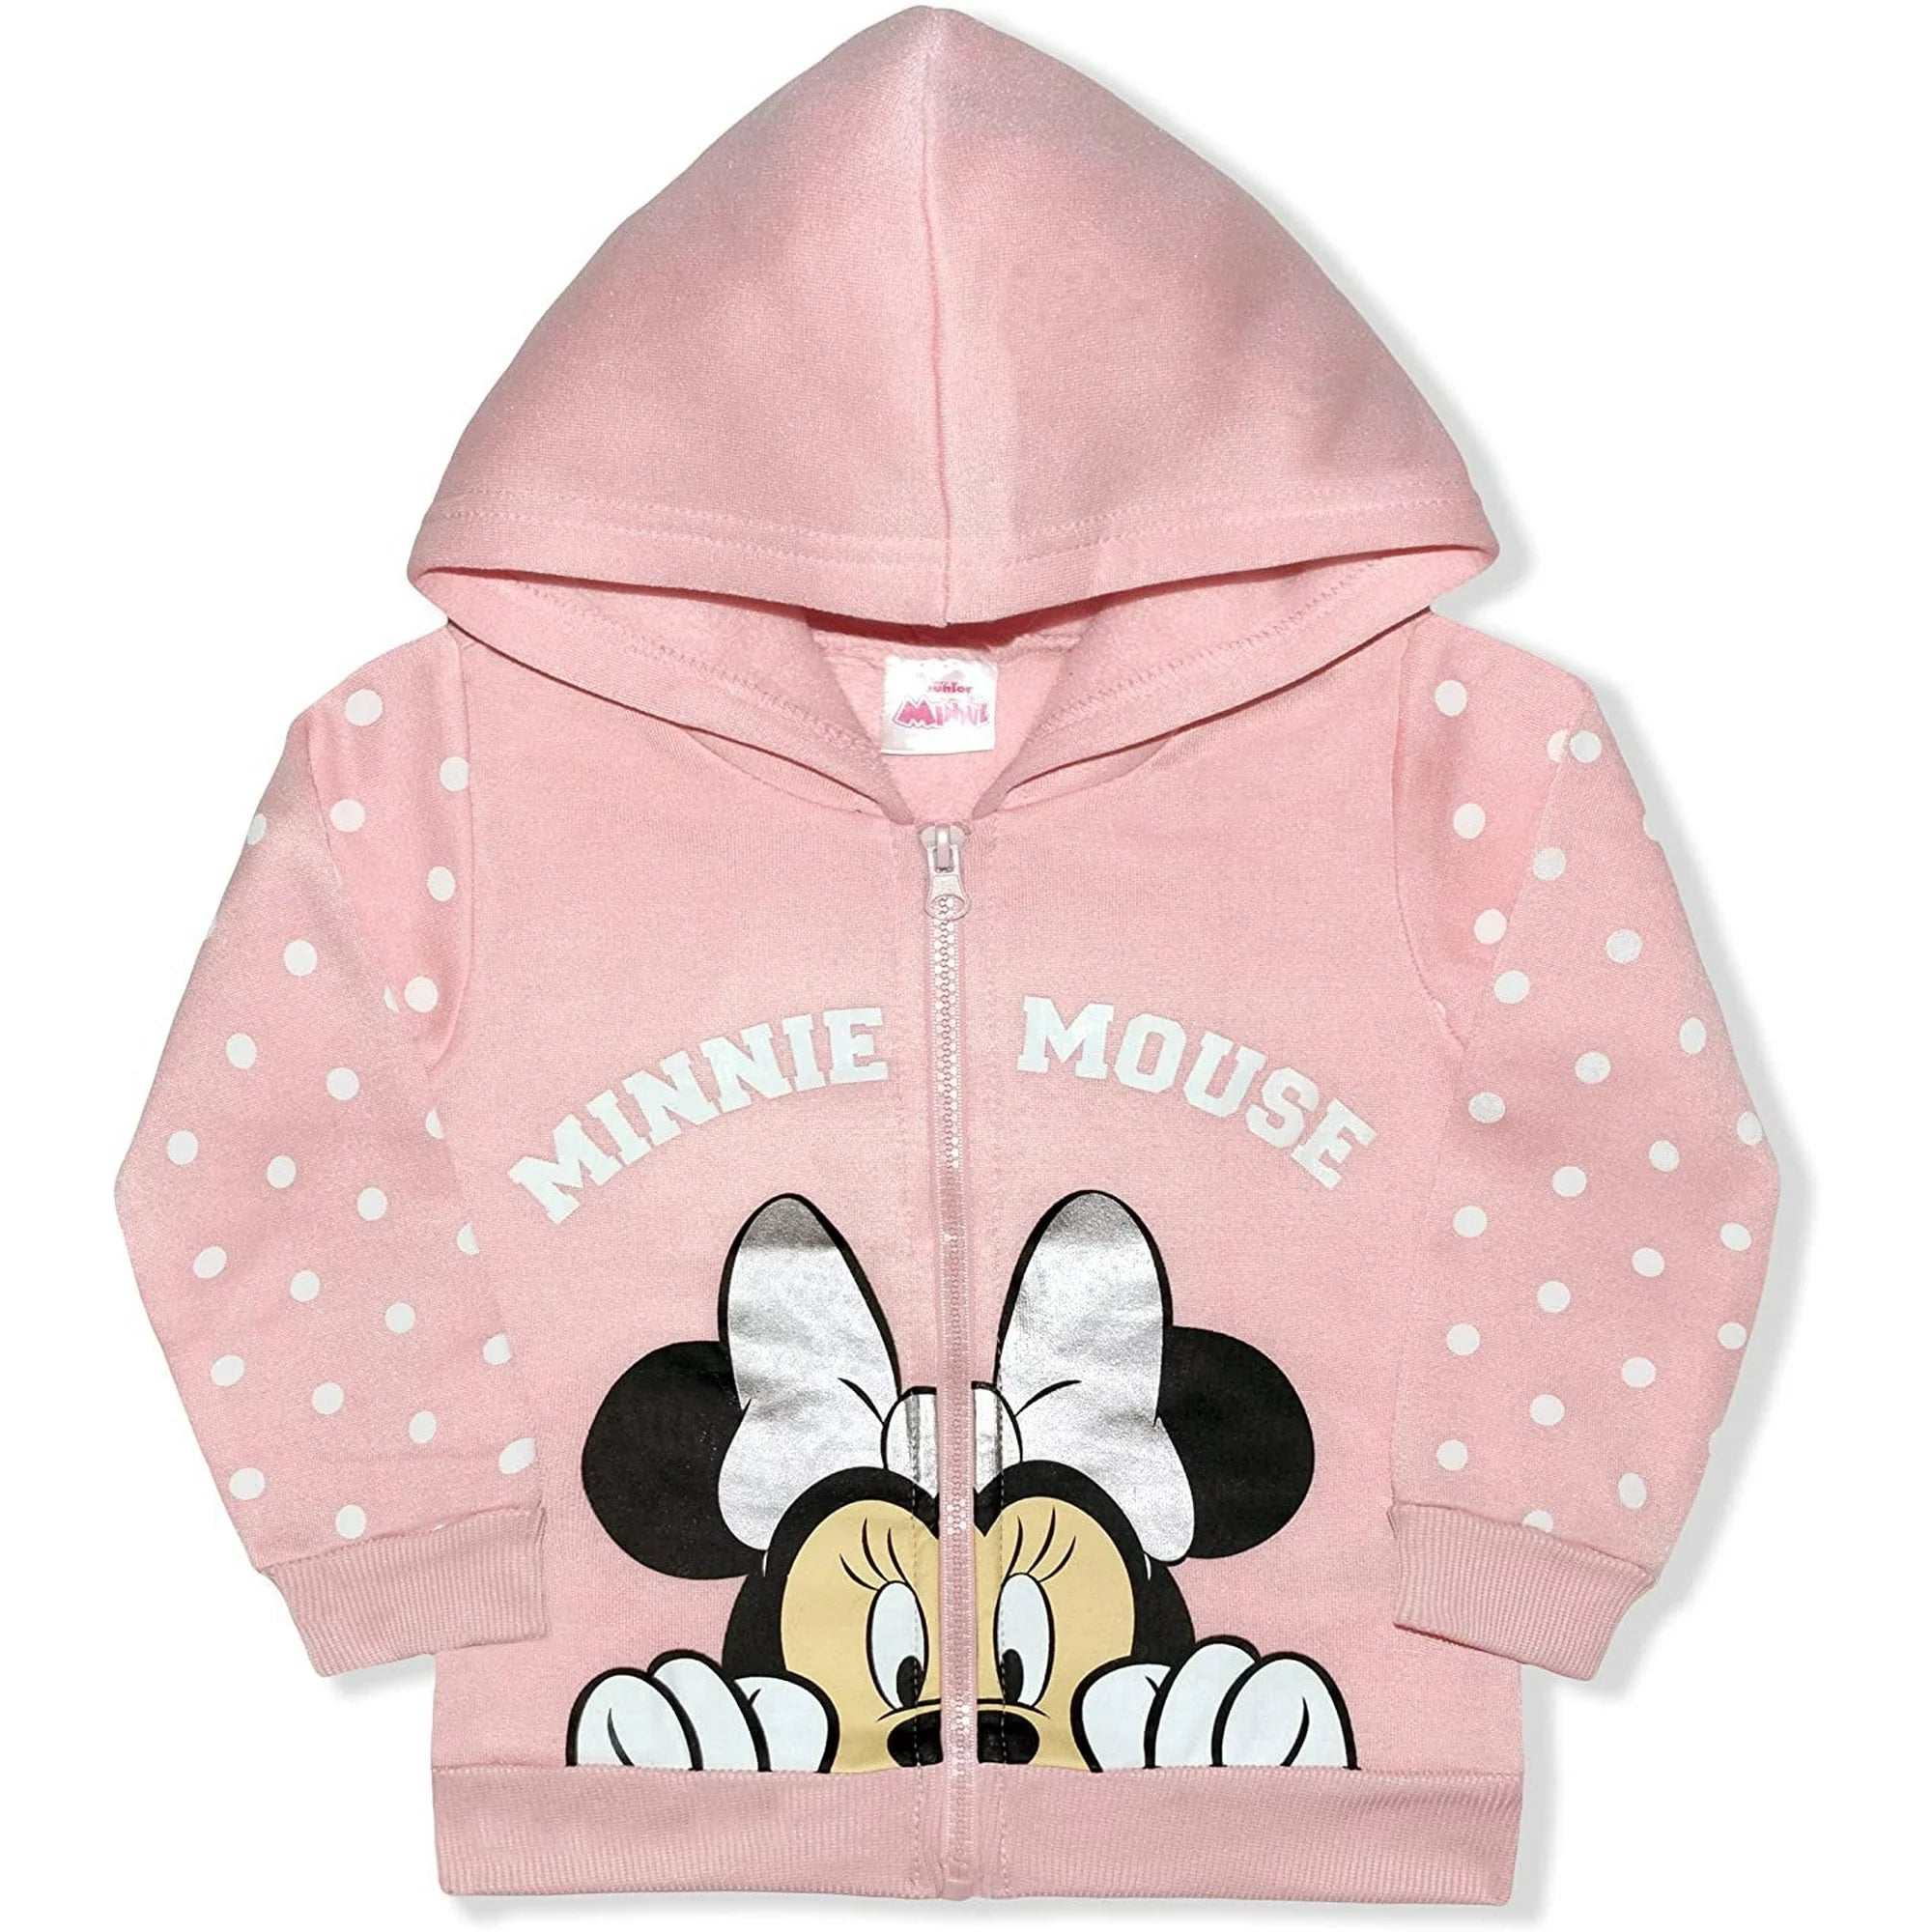 Disney Toddler Girl Minnie Mouse Zip-Up Hoodie, Sizes 2T-4T